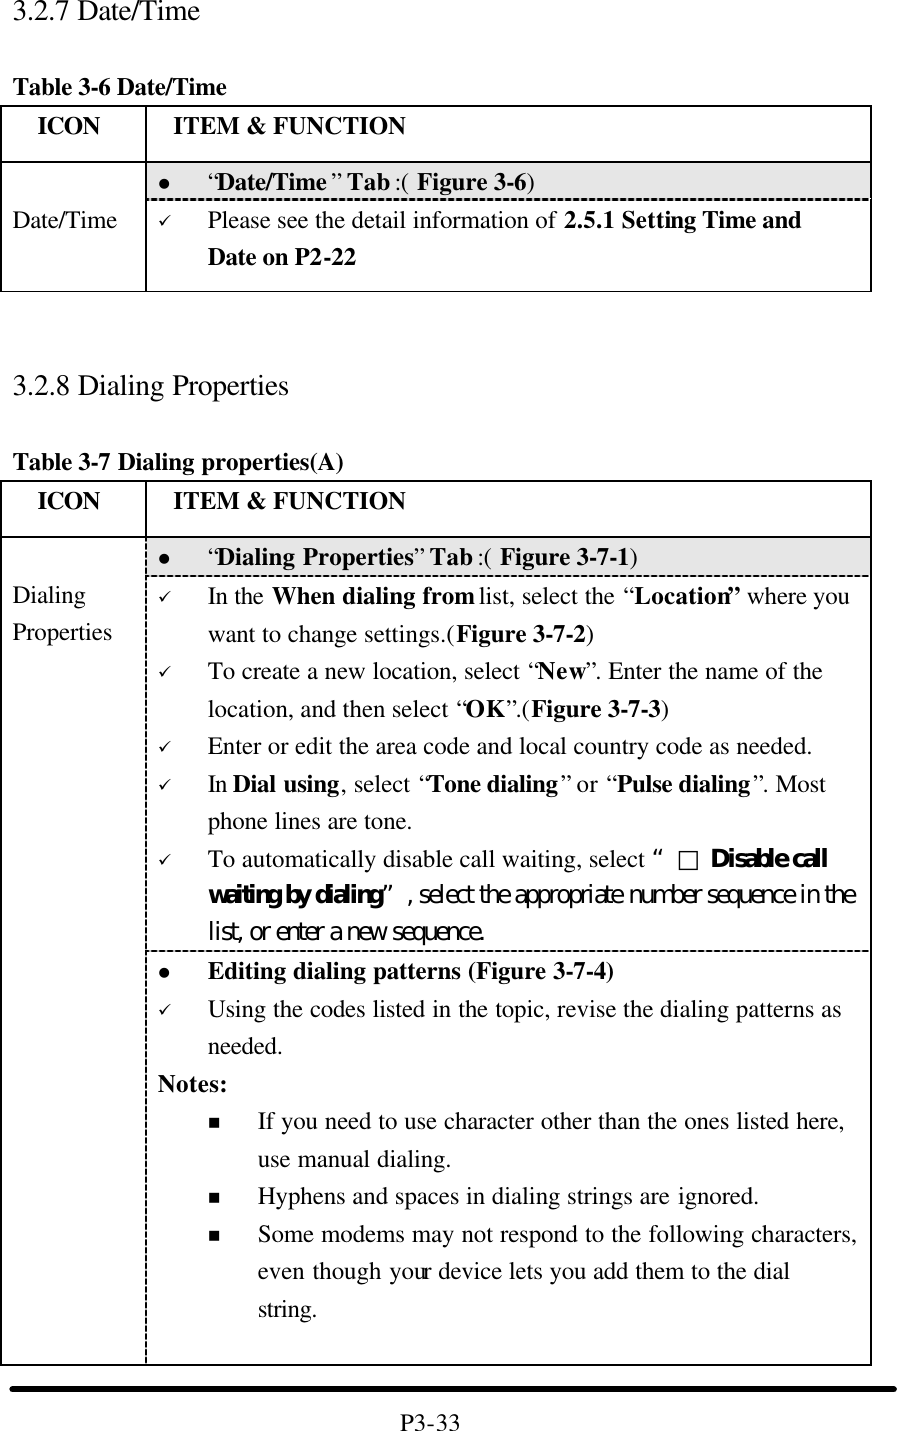 3.2.7 Date/Time  Table 3-6 Date/Time   ICON  ITEM &amp; FUNCTION l “Date/Time ” Tab :( Figure 3-6)    Date/Time ü Please see the detail information of 2.5.1 Setting Time and Date on P2-22    3.2.8 Dialing Properties  Table 3-7 Dialing properties(A)   ICON  ITEM &amp; FUNCTION l “Dialing Properties” Tab :( Figure 3-7-1)   ü In the When dialing from list, select the “Location” where you want to change settings.(Figure 3-7-2) ü To create a new location, select “New”. Enter the name of the location, and then select “OK”.(Figure 3-7-3) ü Enter or edit the area code and local country code as needed. ü In Dial using, select “Tone dialing” or “Pulse dialing”. Most phone lines are tone. ü To automatically disable call waiting, select “□ Disable call waiting by dialing”, select the appropriate number sequence in the list, or enter a new sequence.  Dialing Properties l Editing dialing patterns (Figure 3-7-4) ü Using the codes listed in the topic, revise the dialing patterns as needed. Notes: n If you need to use character other than the ones listed here, use manual dialing. n Hyphens and spaces in dialing strings are ignored. n Some modems may not respond to the following characters, even though your device lets you add them to the dial string.   P3-33 